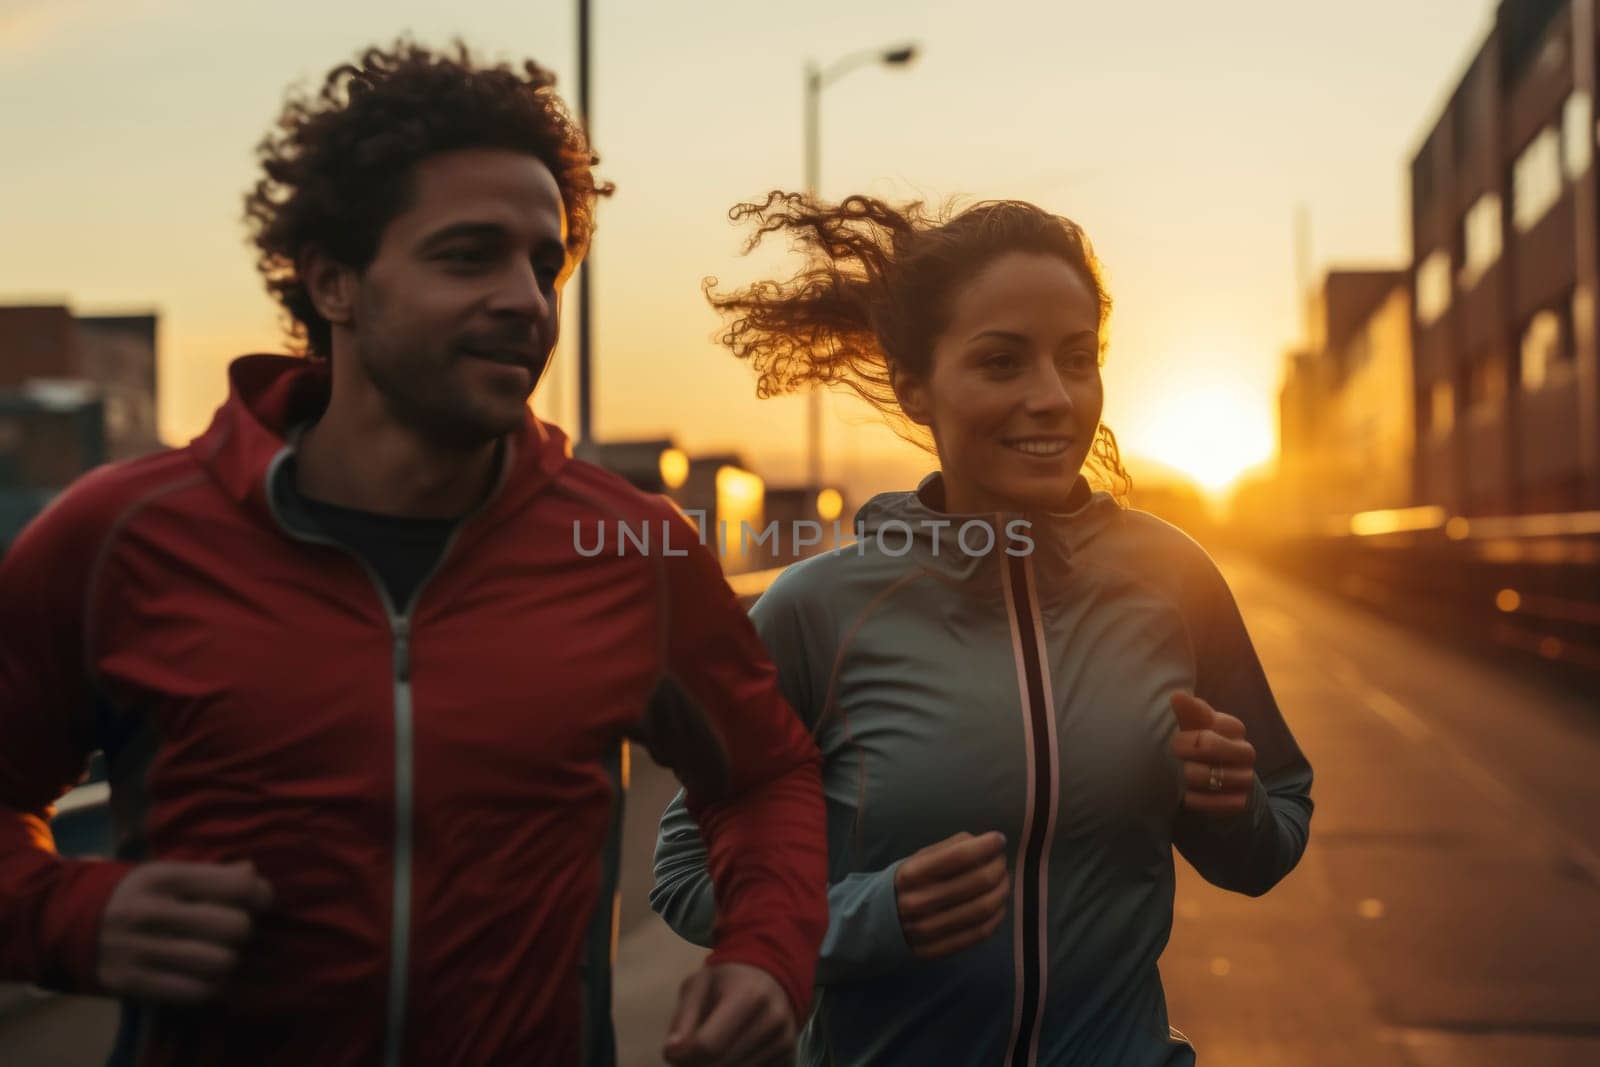 Man and woman jogging at sunset in urban environment. by andreyz